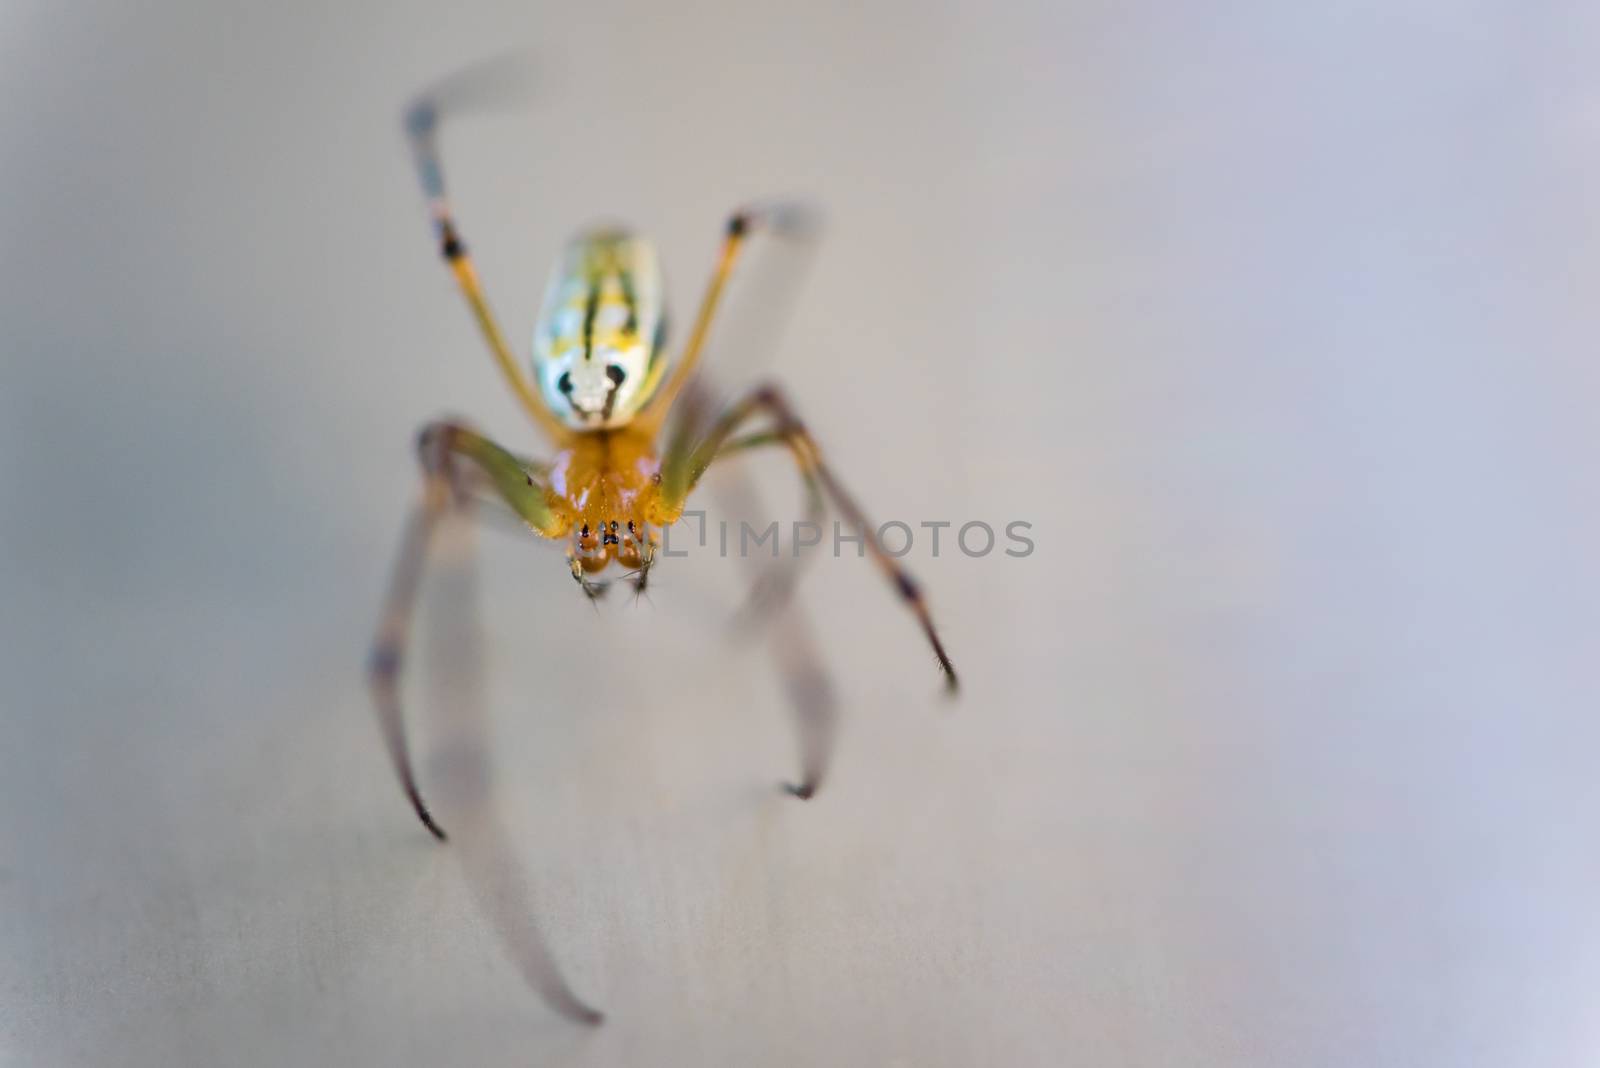 Small Spider by justtscott